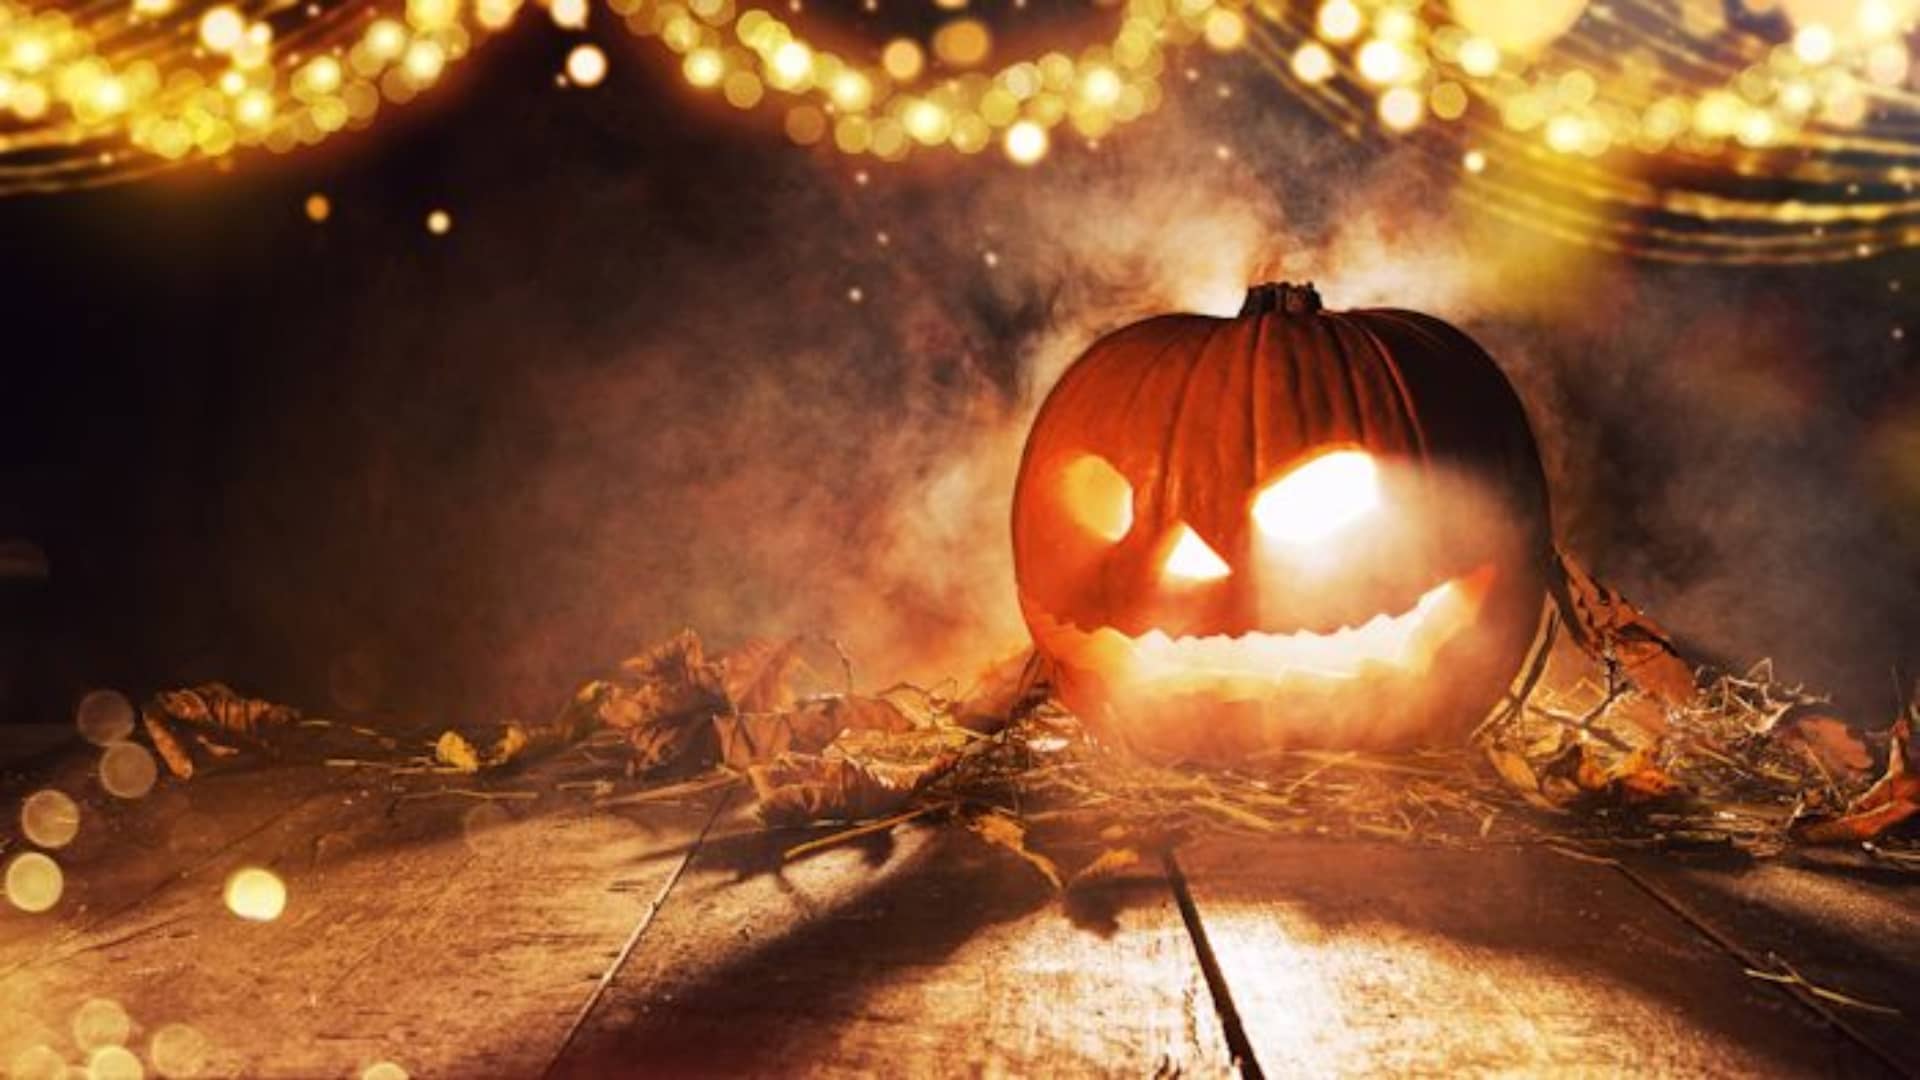 The History Of Trick or Treat Traditions